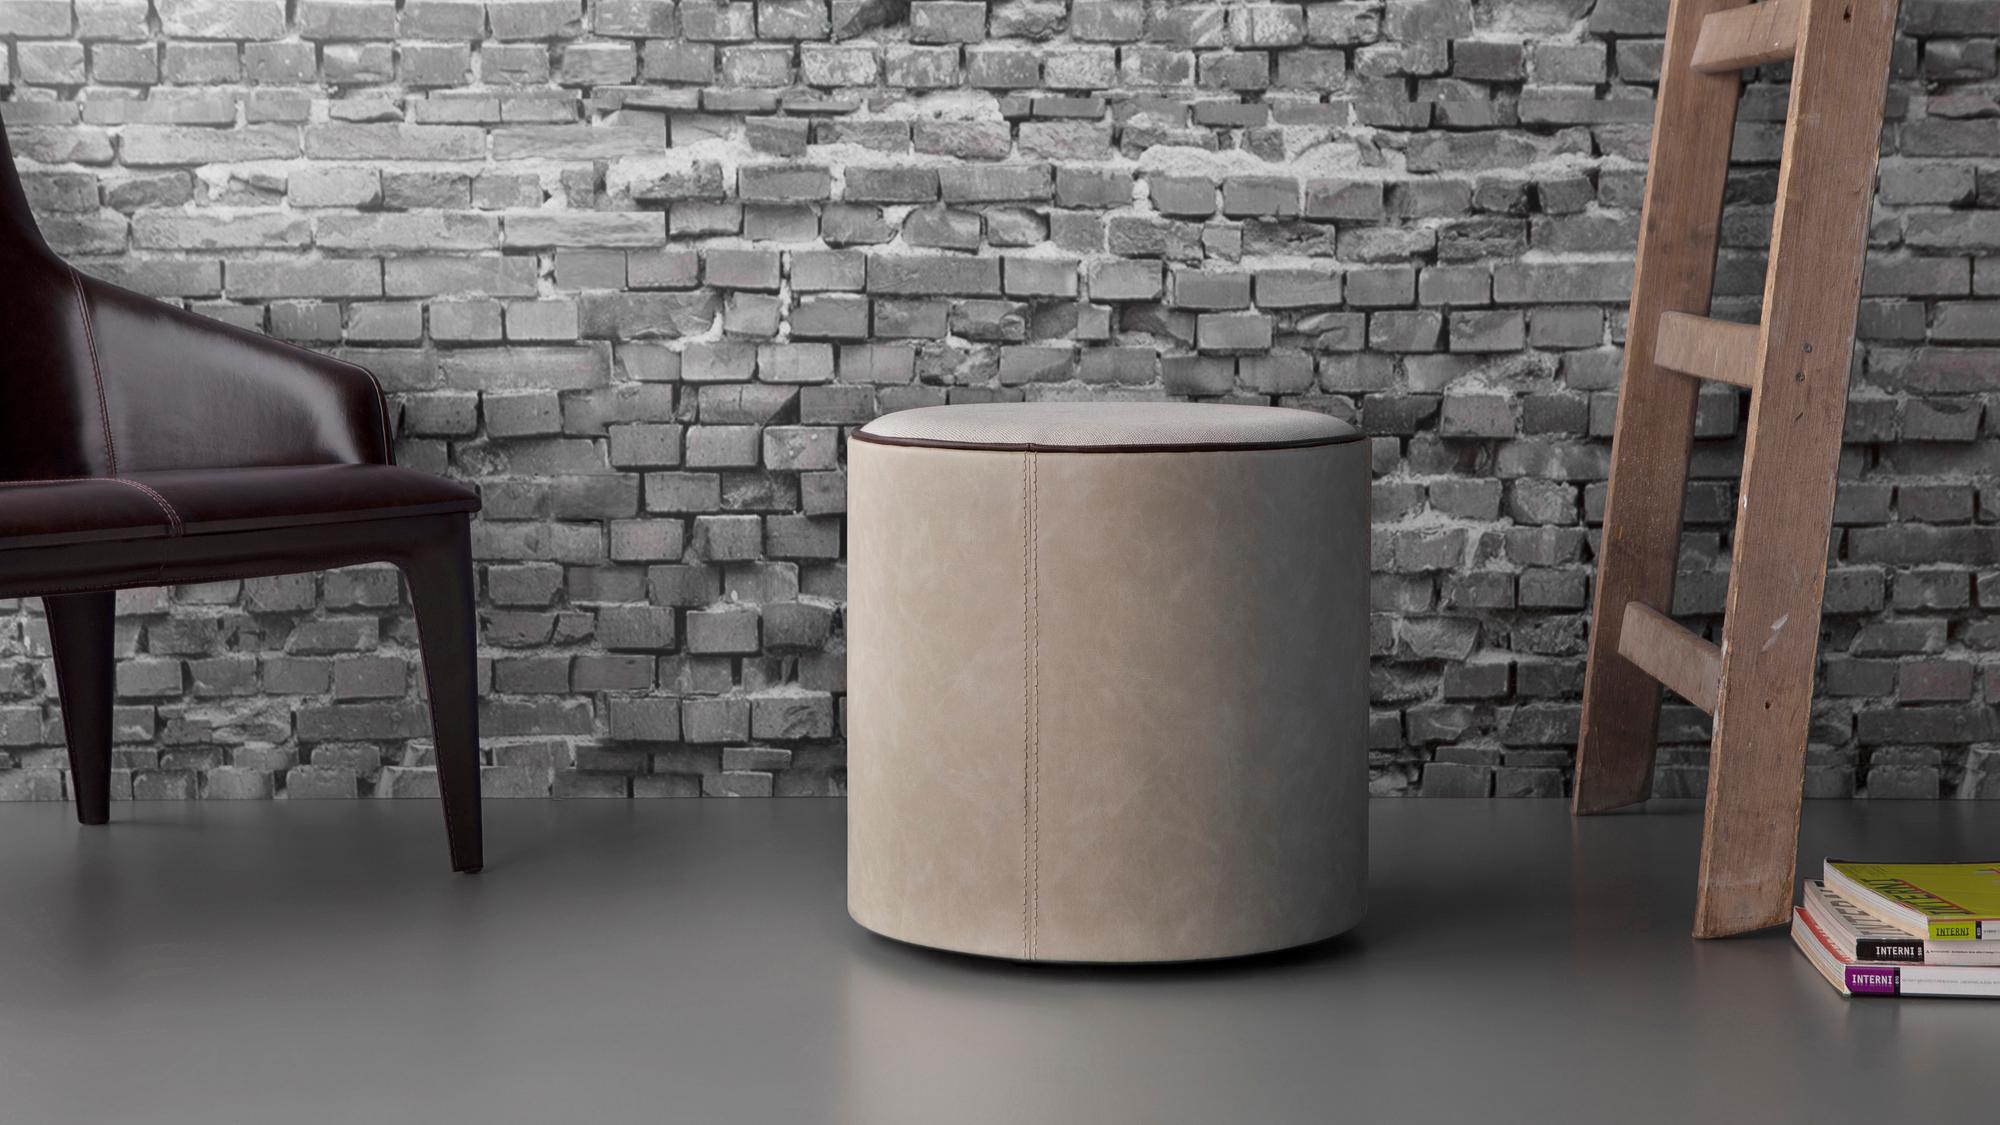 Bol Pouf by Doimo Brasil
Dimensions: D 50 x H 45 cm 
Materials: Leather.

Also available in D 90 x H 34 cm, D 110 x H 34 cm, D 130 x H 34 cm.

With the intention of providing good taste and personality, Doimo deciphers trends and follows the